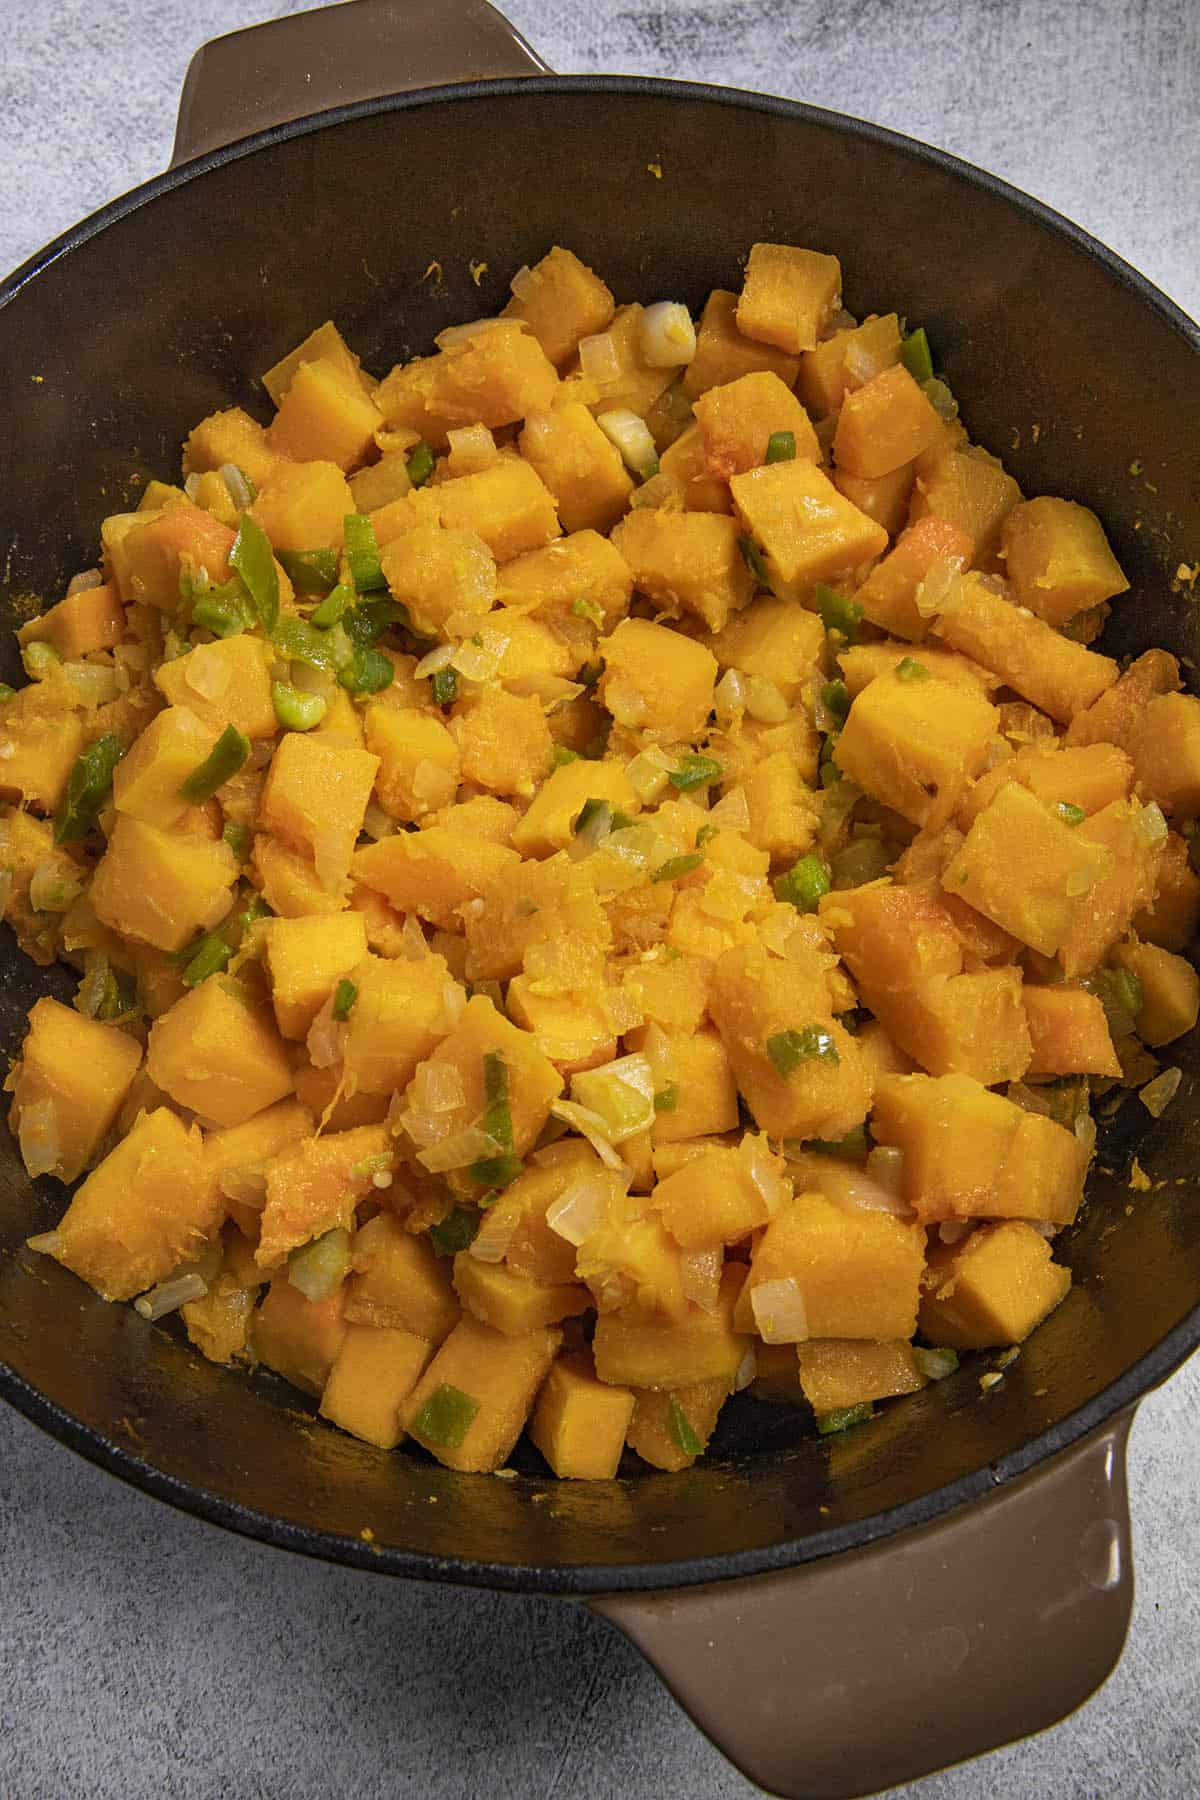 Cooking down butternut squash and vegetables in a pot to make Butternut Squash Soup